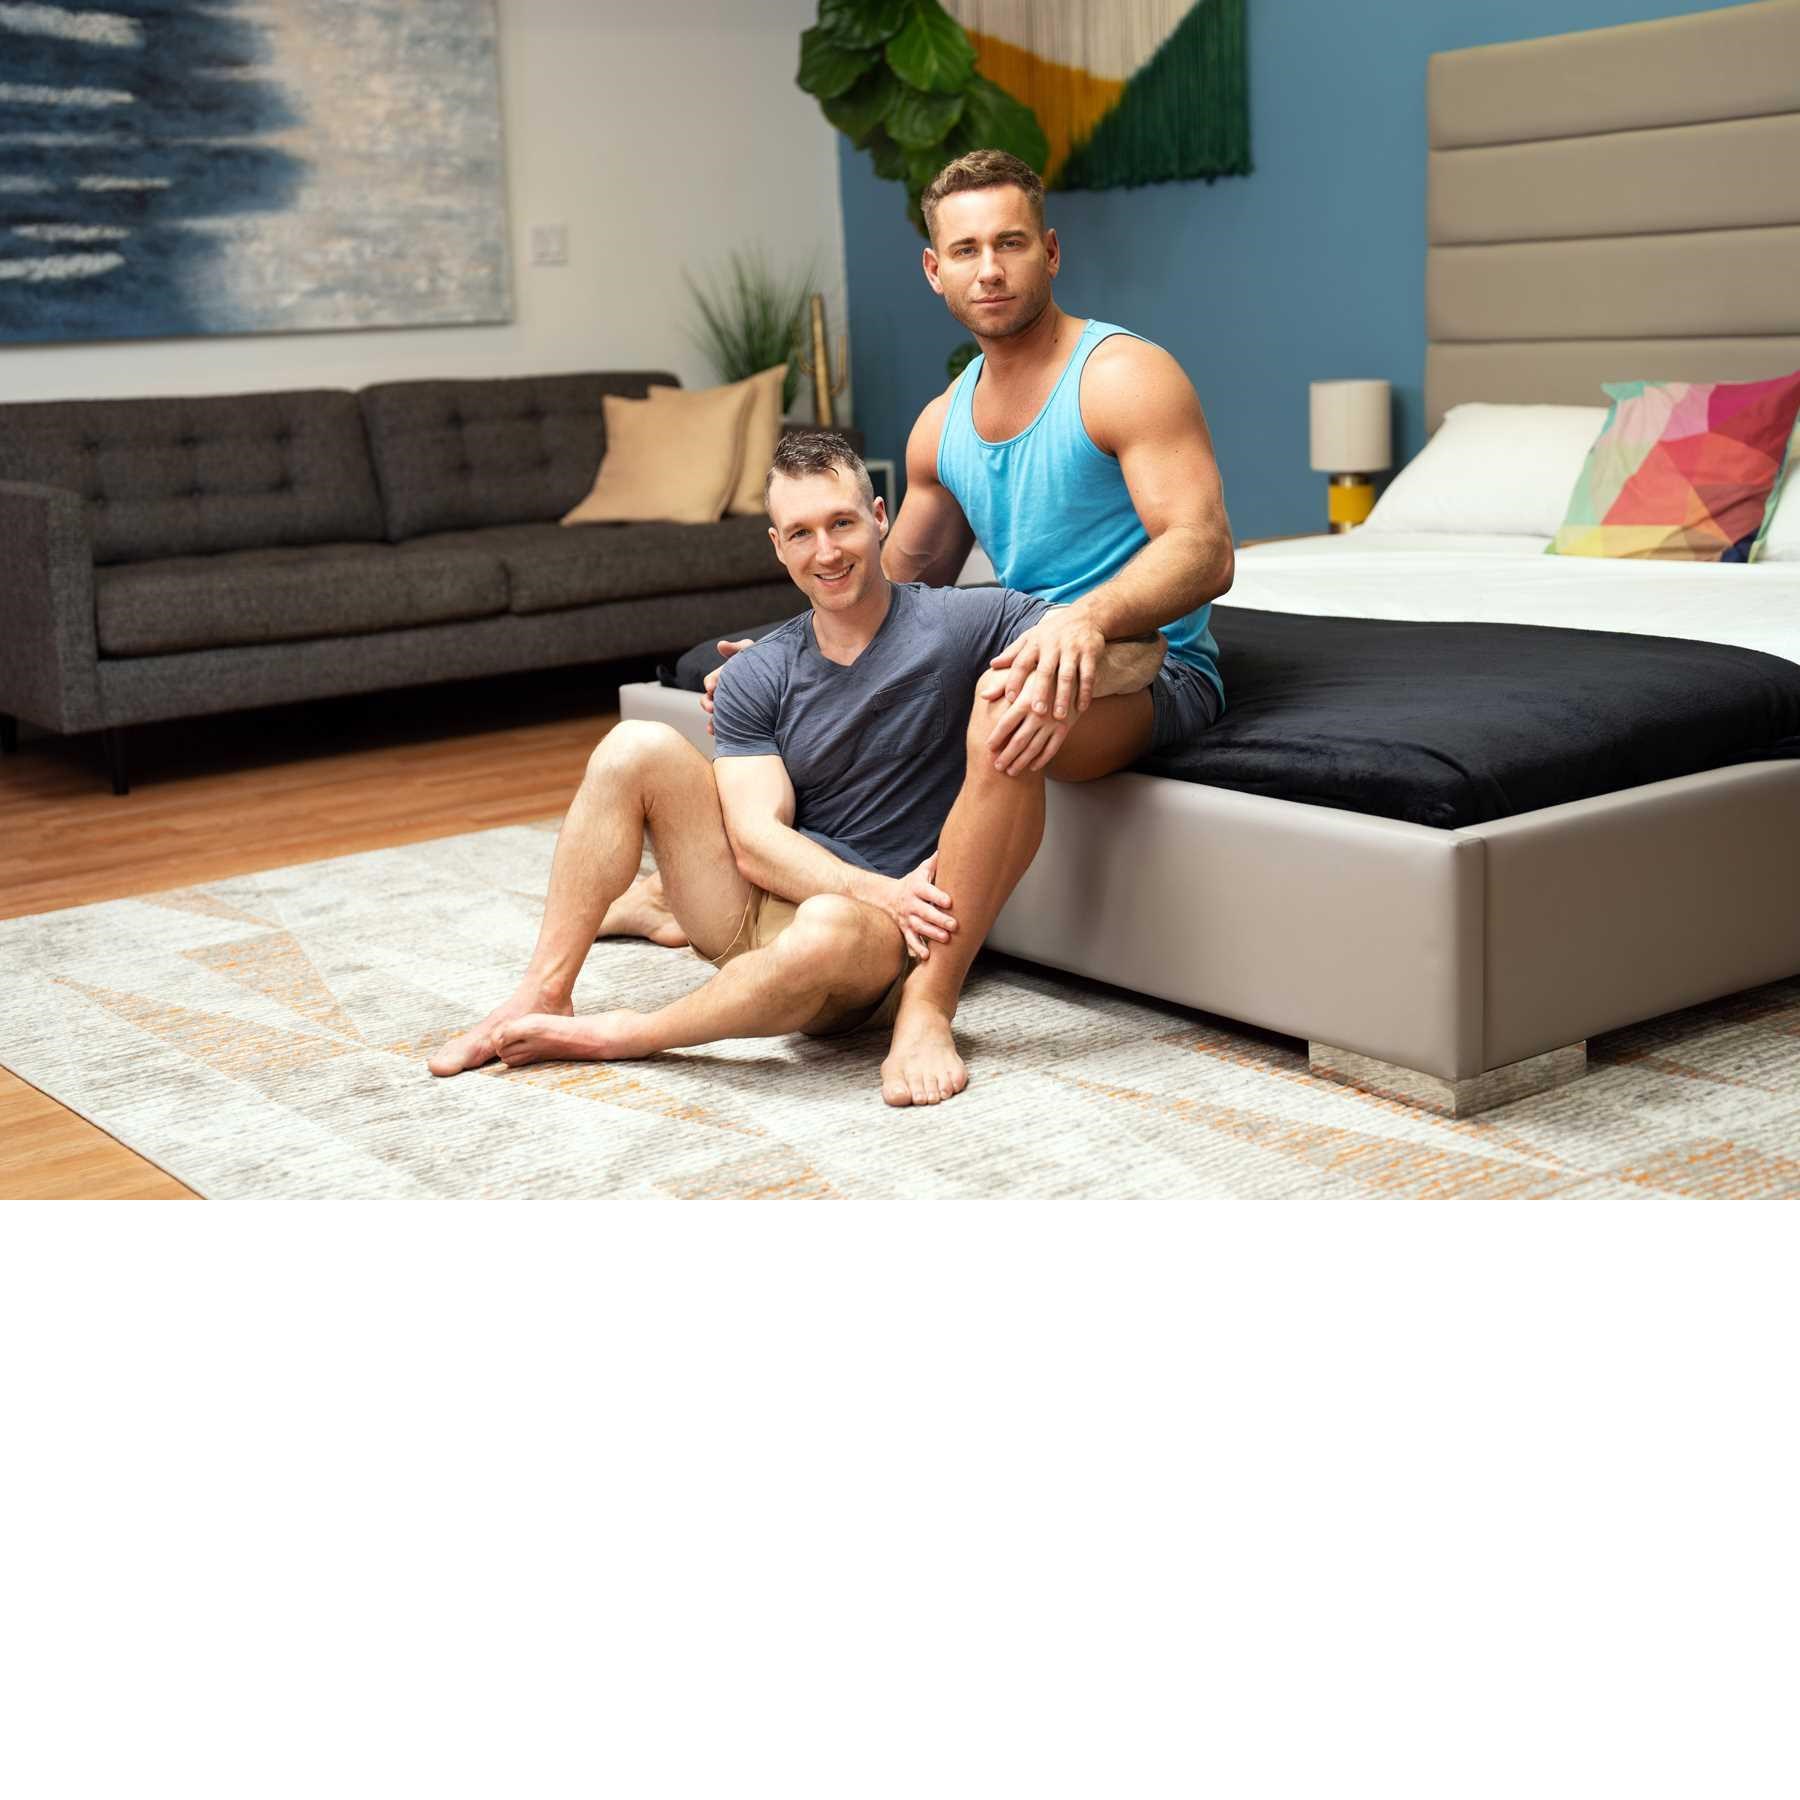 Two clothed males posed seated in bed room